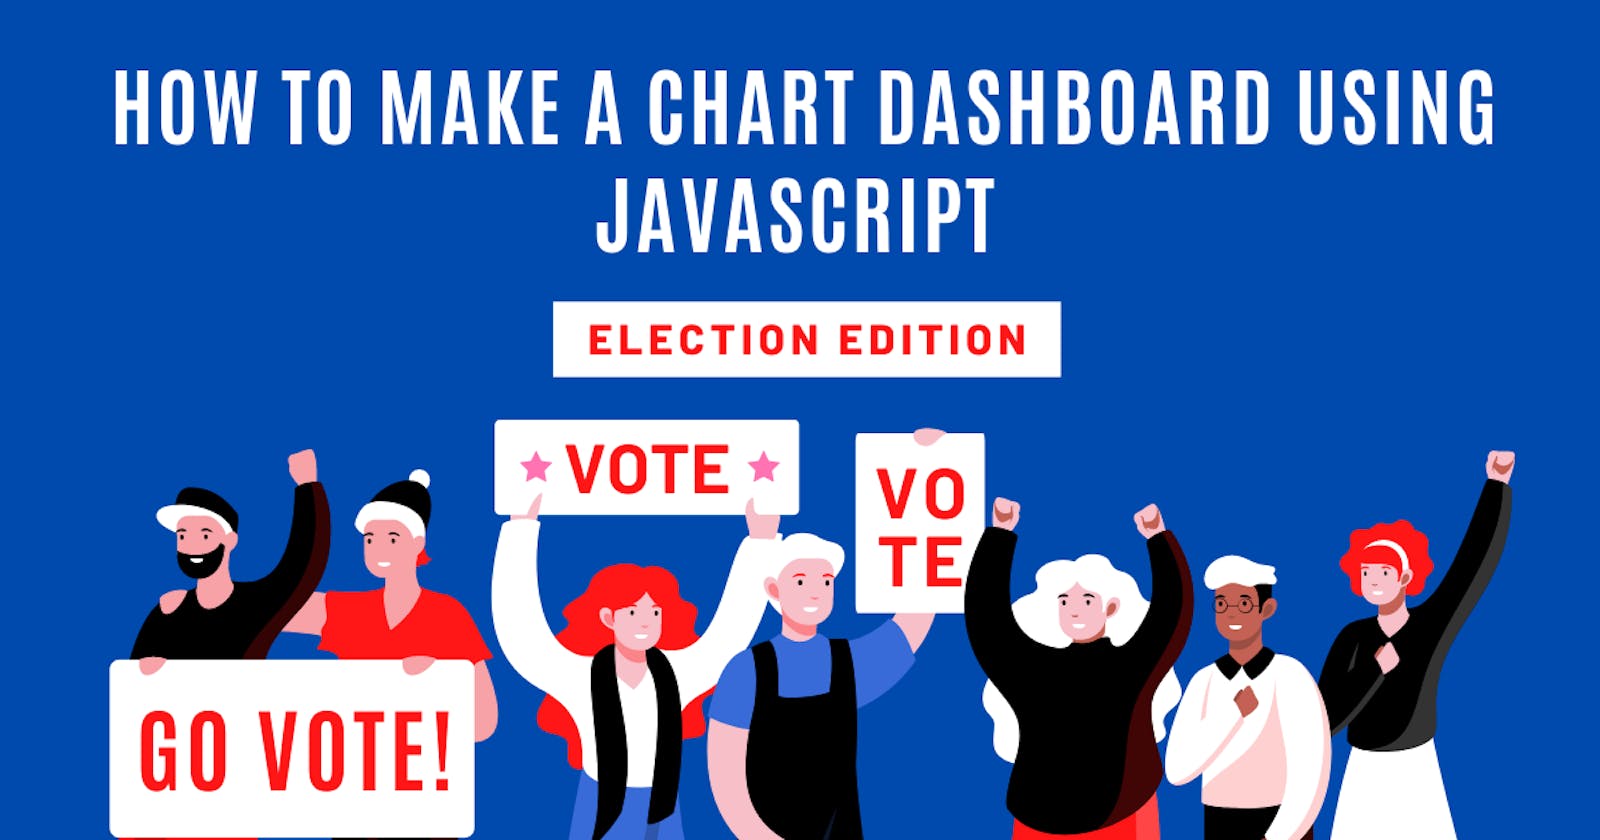 How to make a chart dashboard using JavaScript: election edition